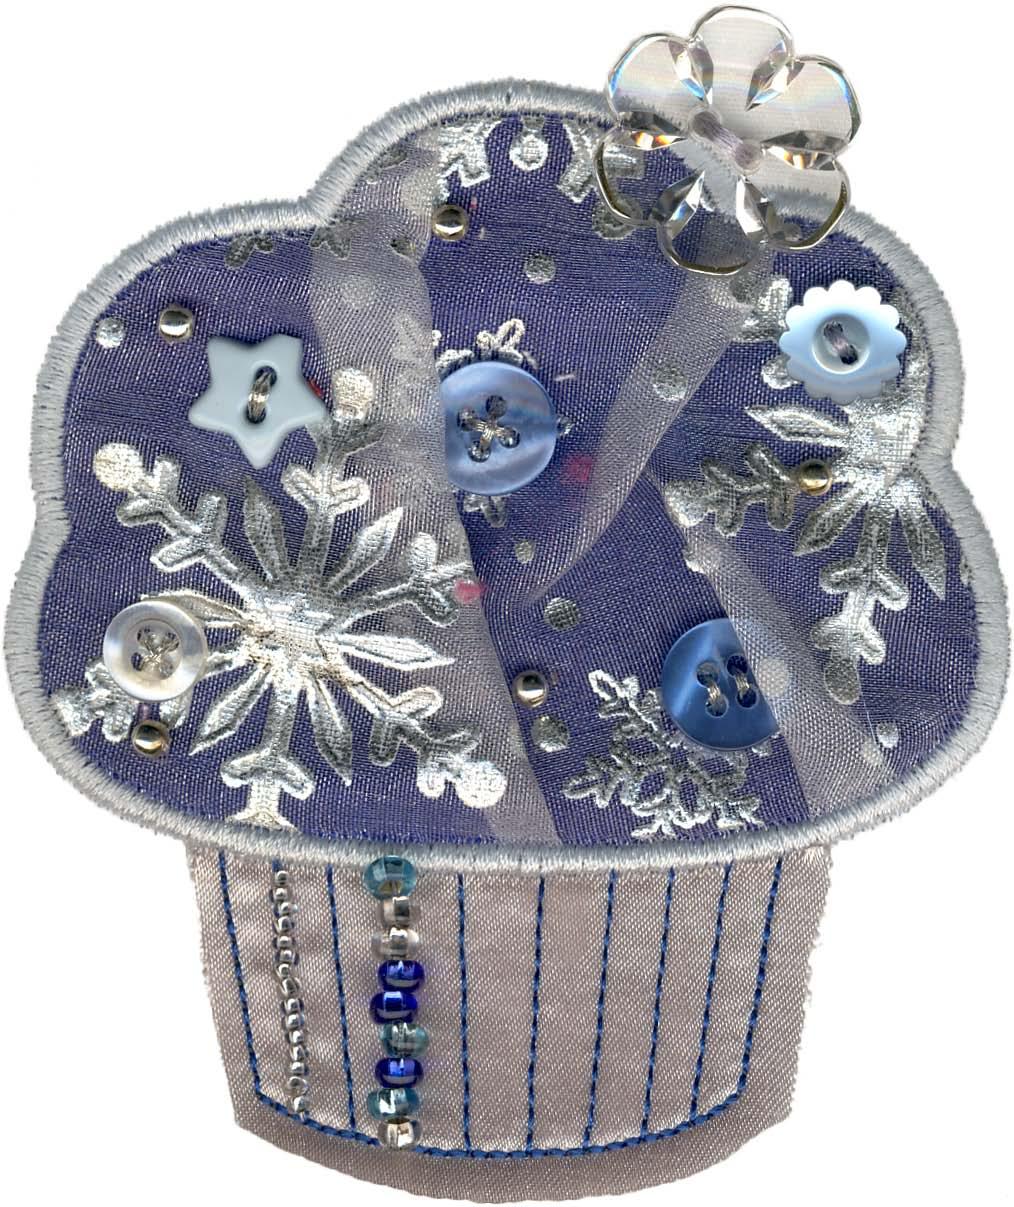 12397-07 Winter Cupcake Cute as a Cupcake Additional embellishments used: Large clear flower button, an assortment of light blue & white buttons, & silver, clear, & blue beads attached by hand.